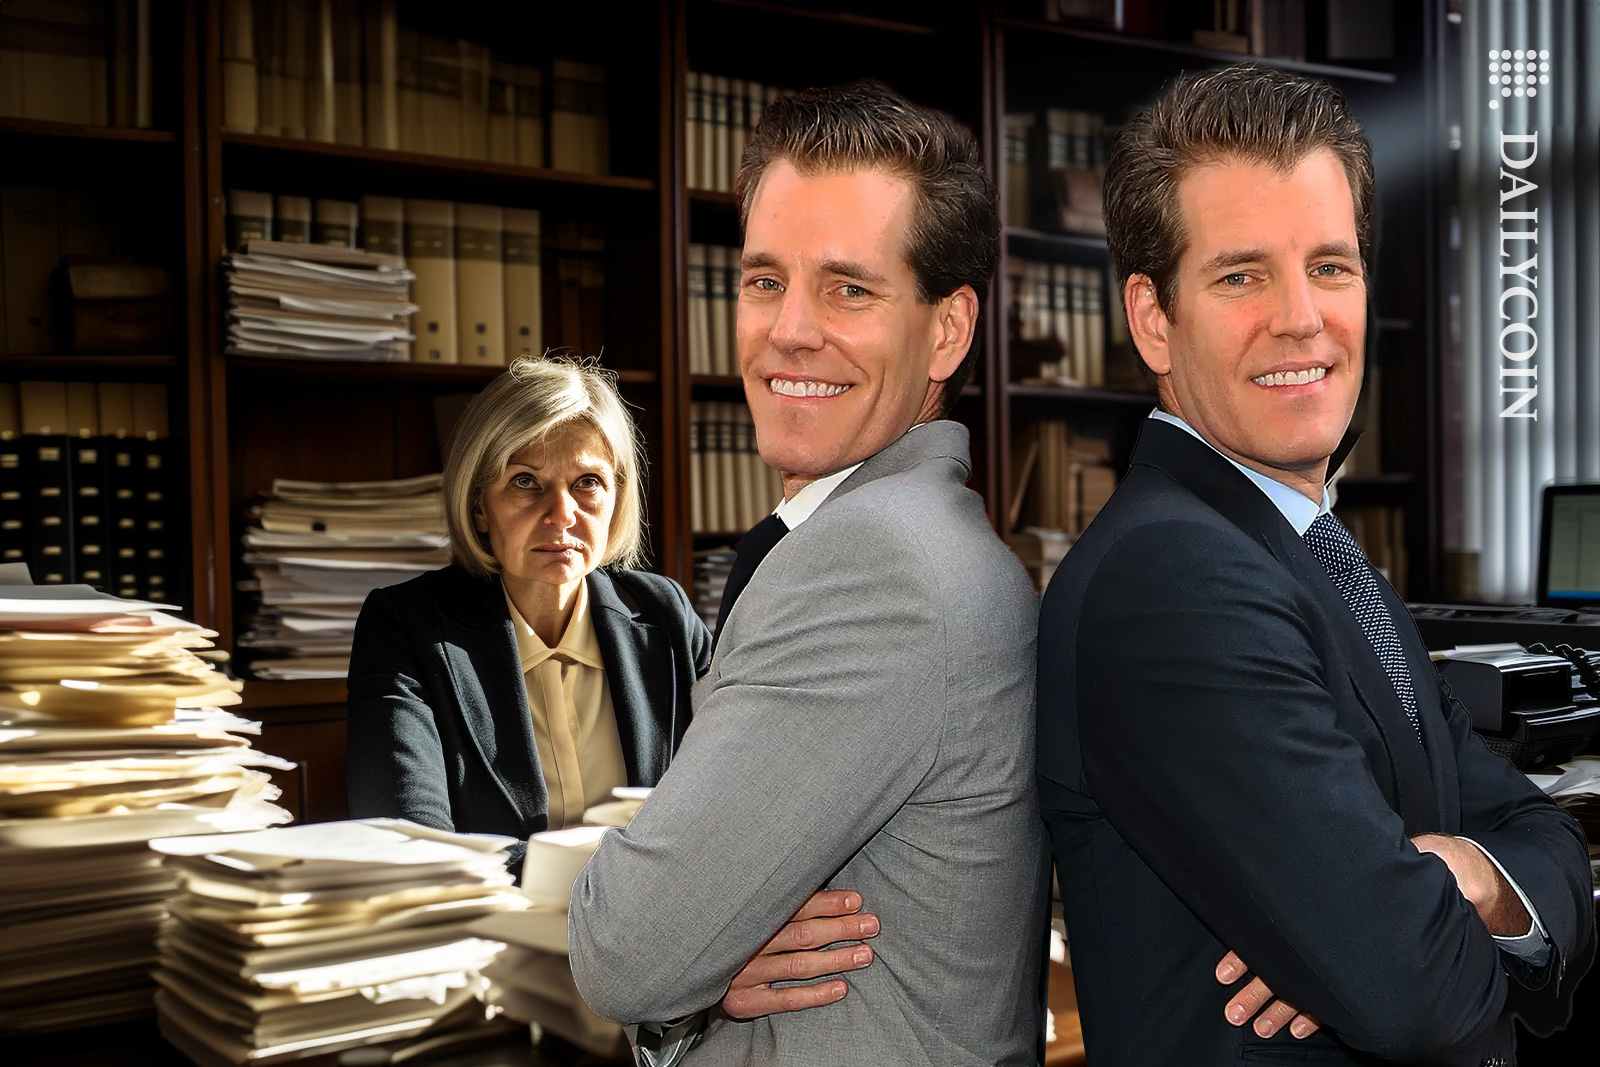 Winklevoss twins in their lawyers office and the lawyer is not impressed.